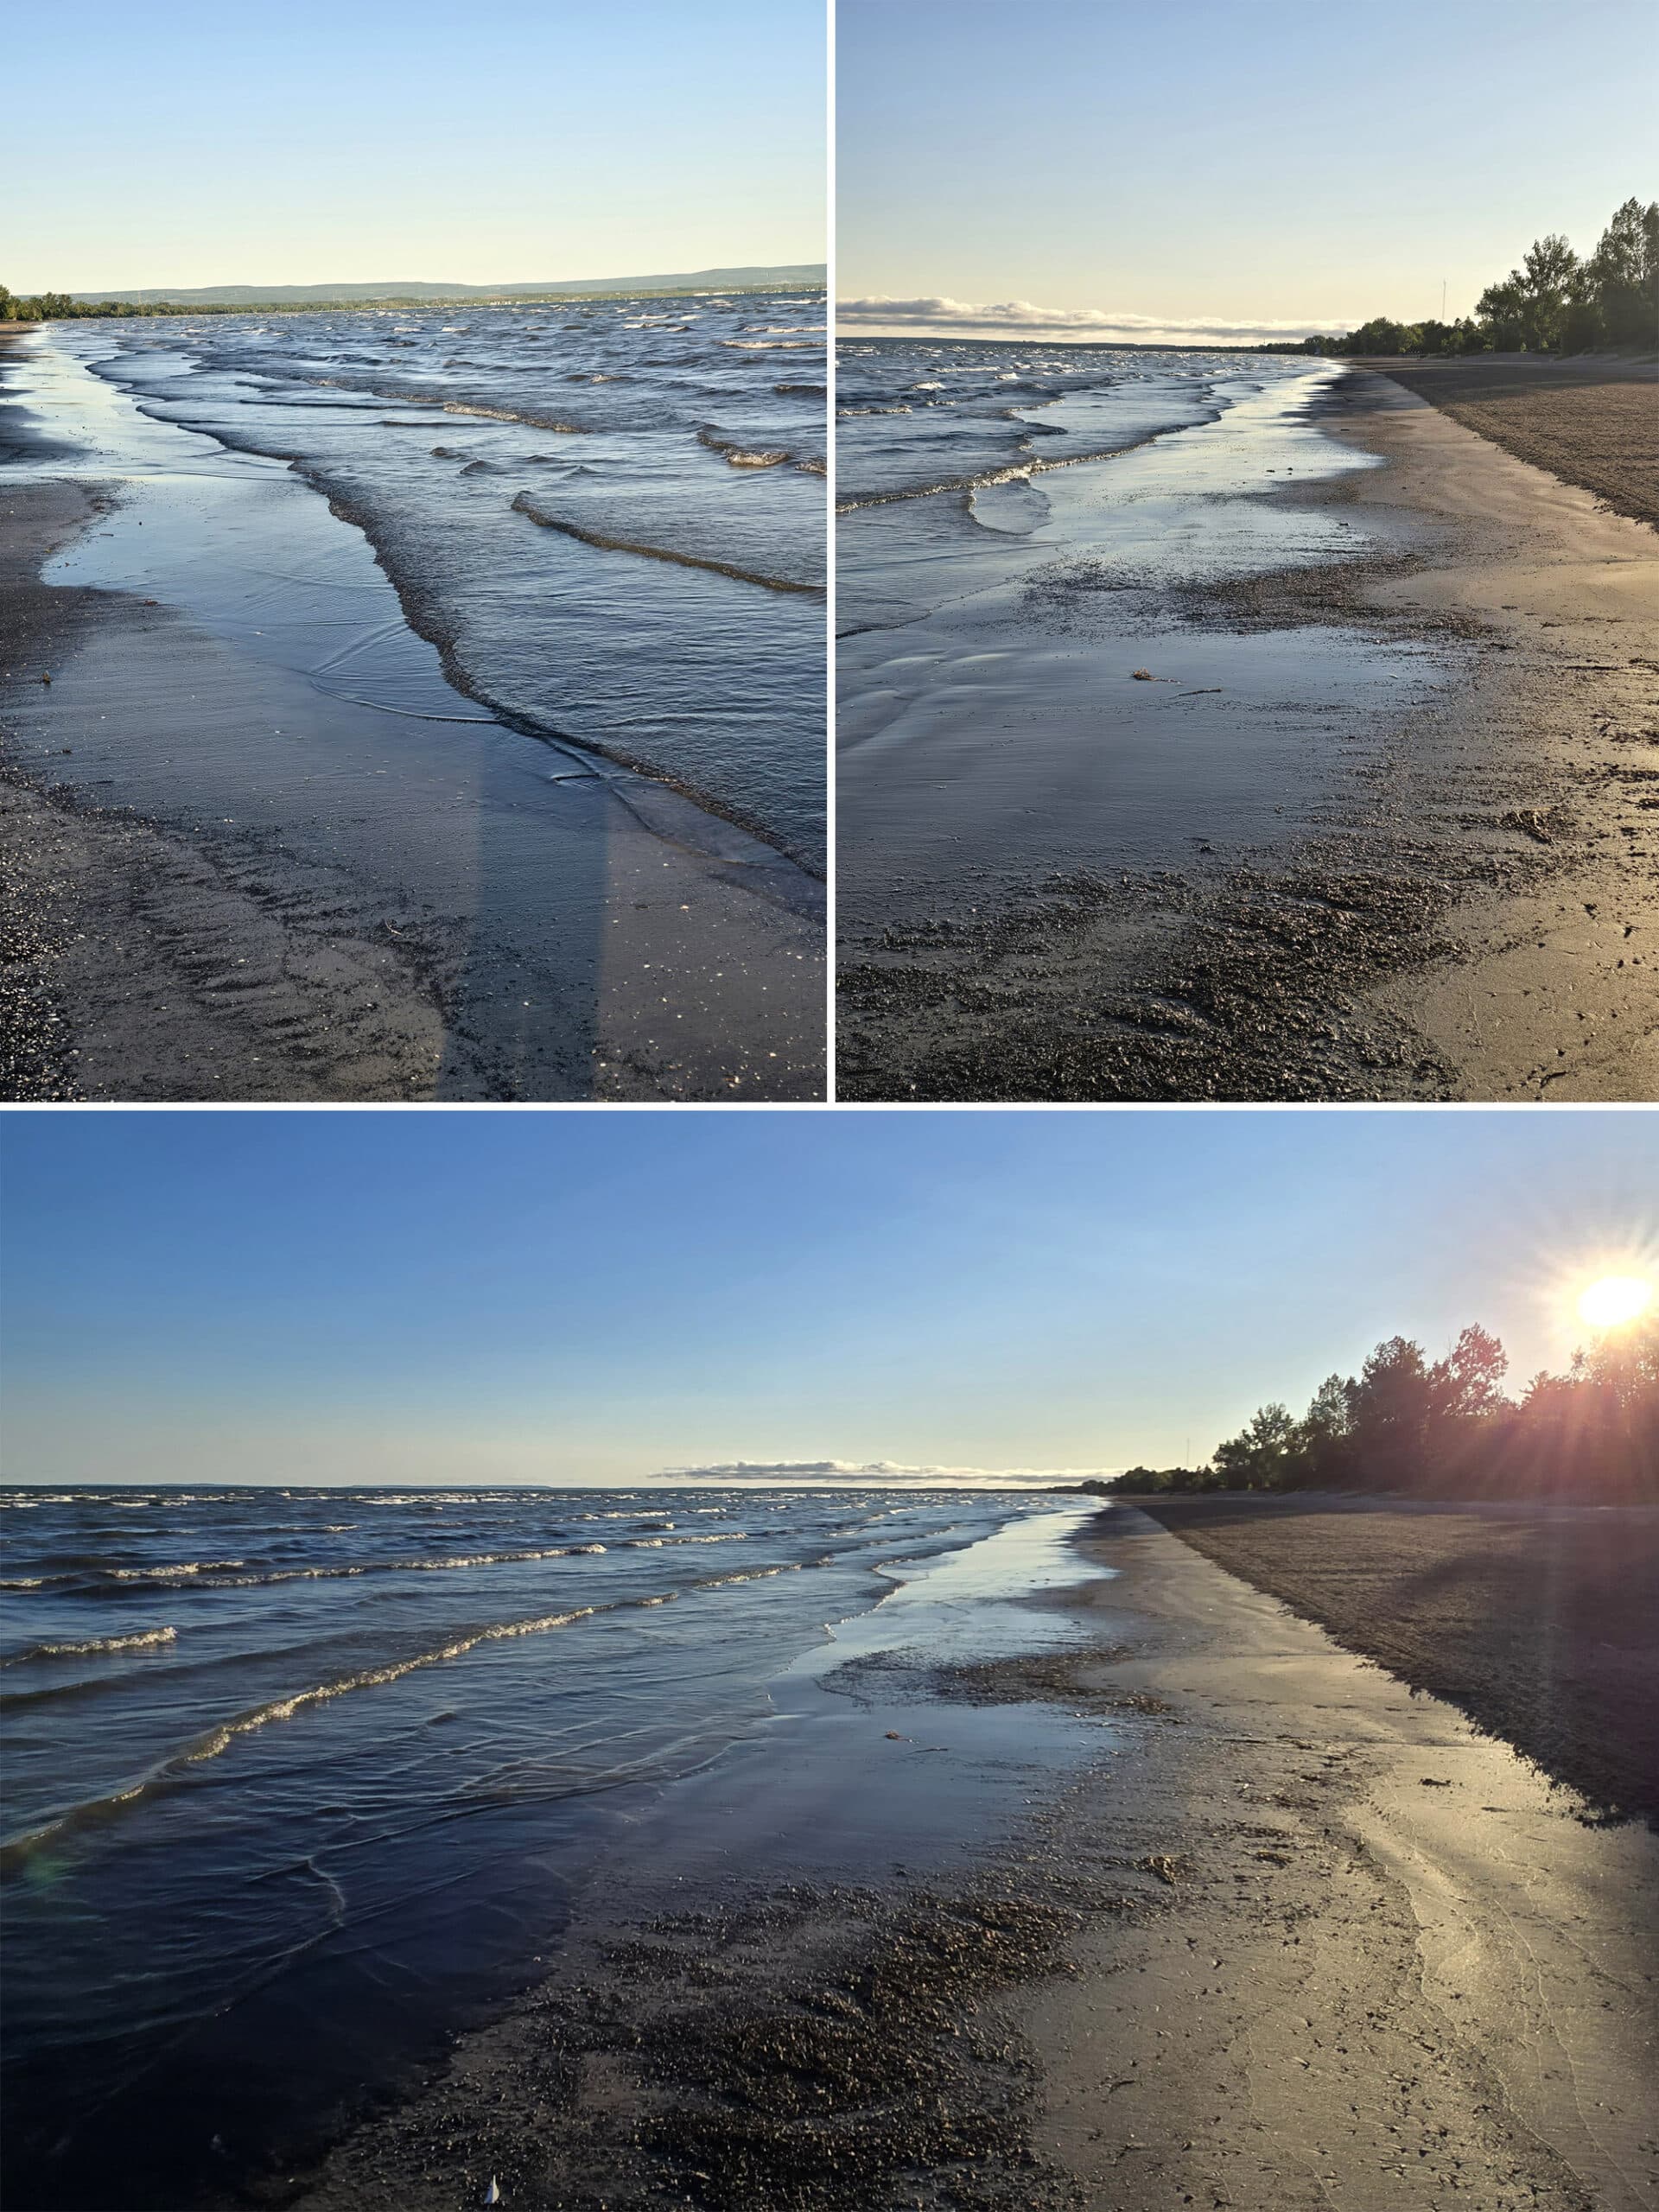 3 part image showing a sandy beach at sunrise.